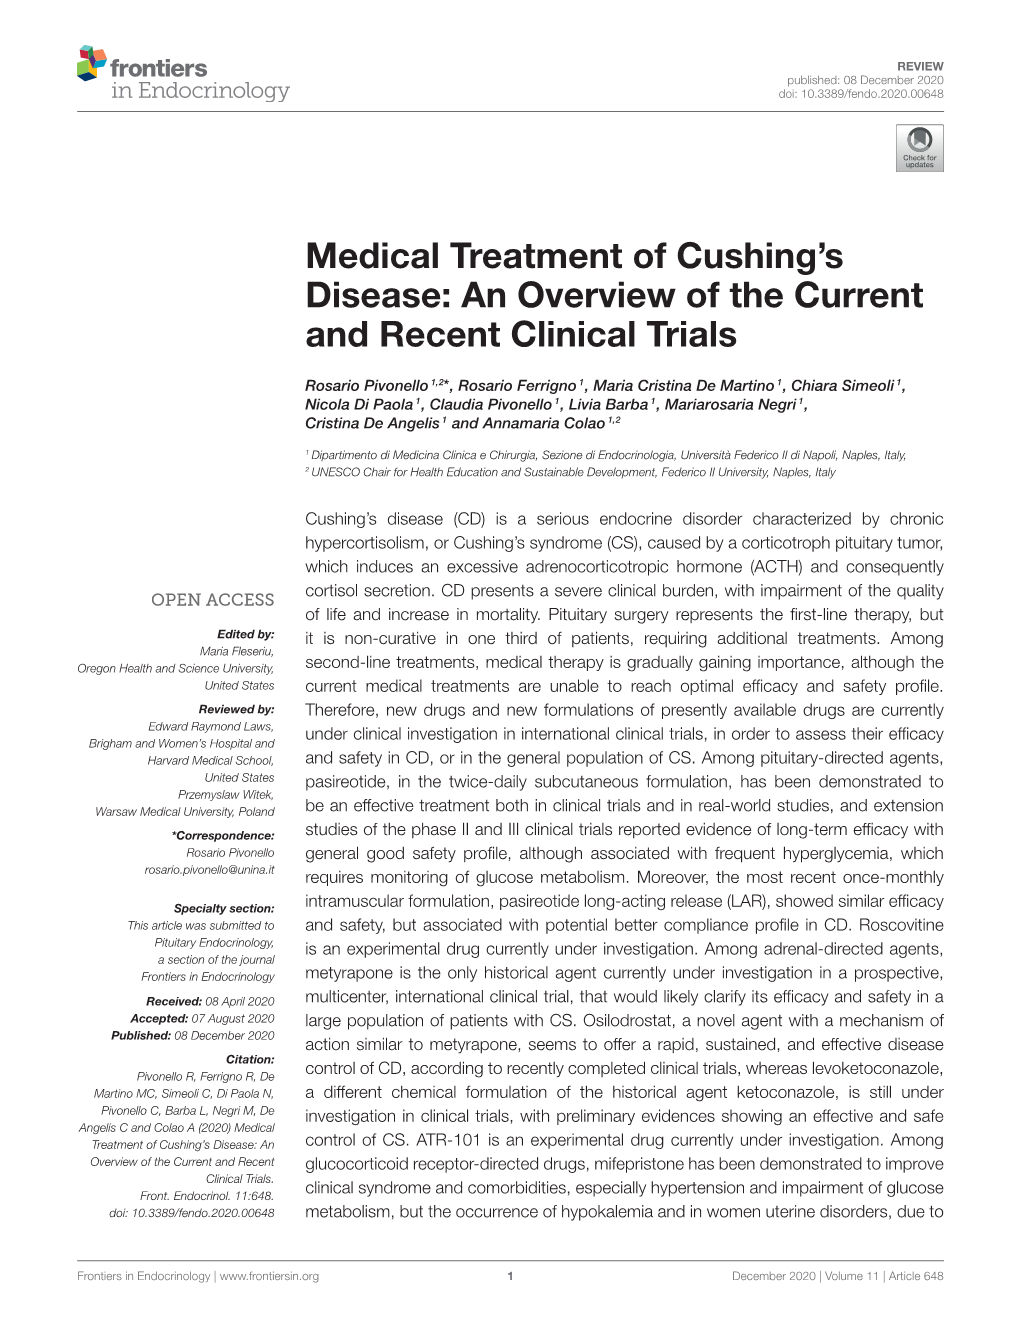 An Overview of the Current and Recent Clinical Trials